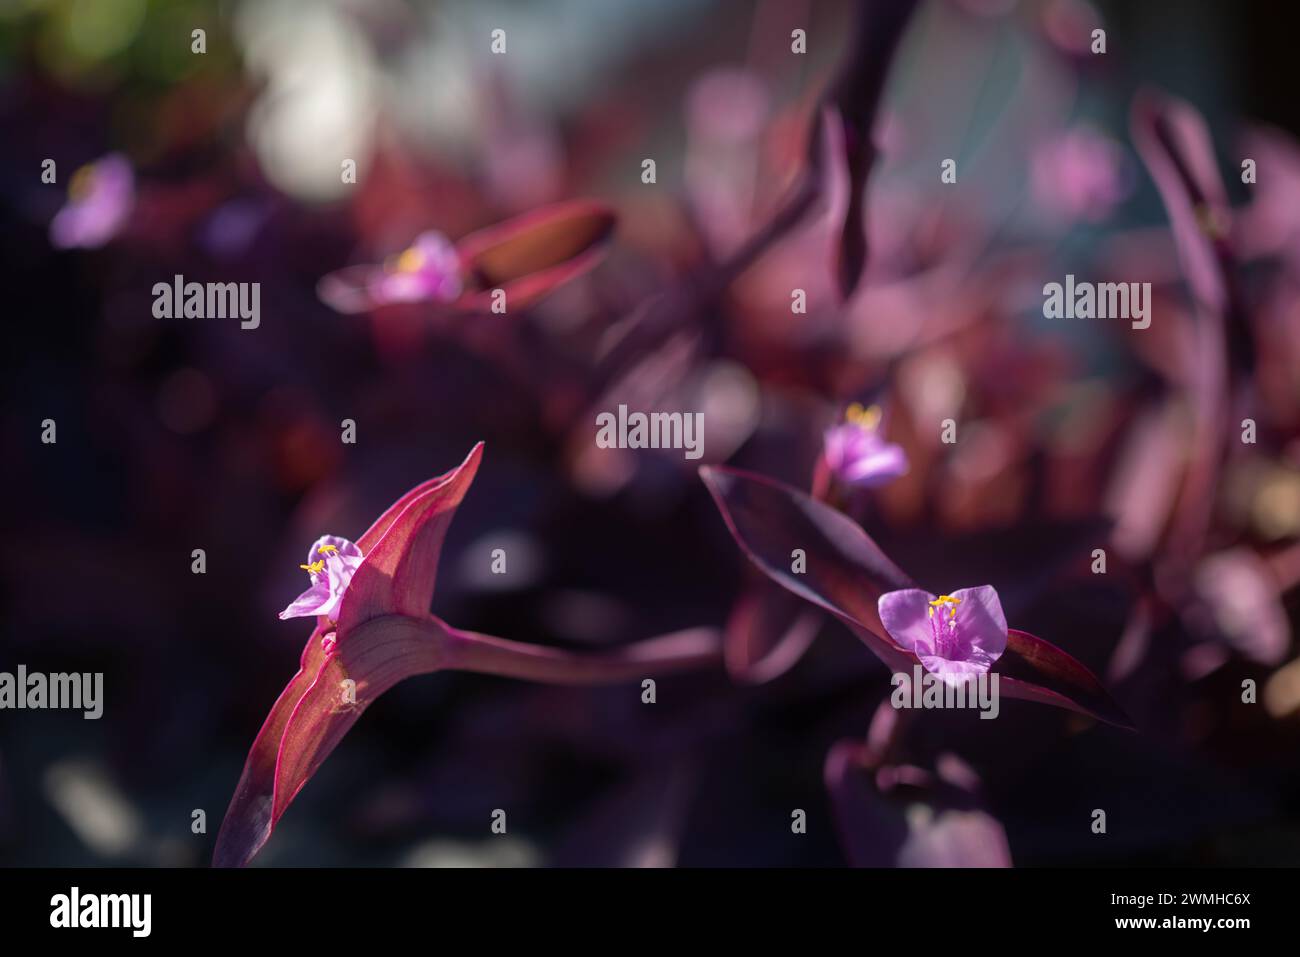 Blurred purple heart plant. Purple leaves background with pink flowers closeup Stock Photo